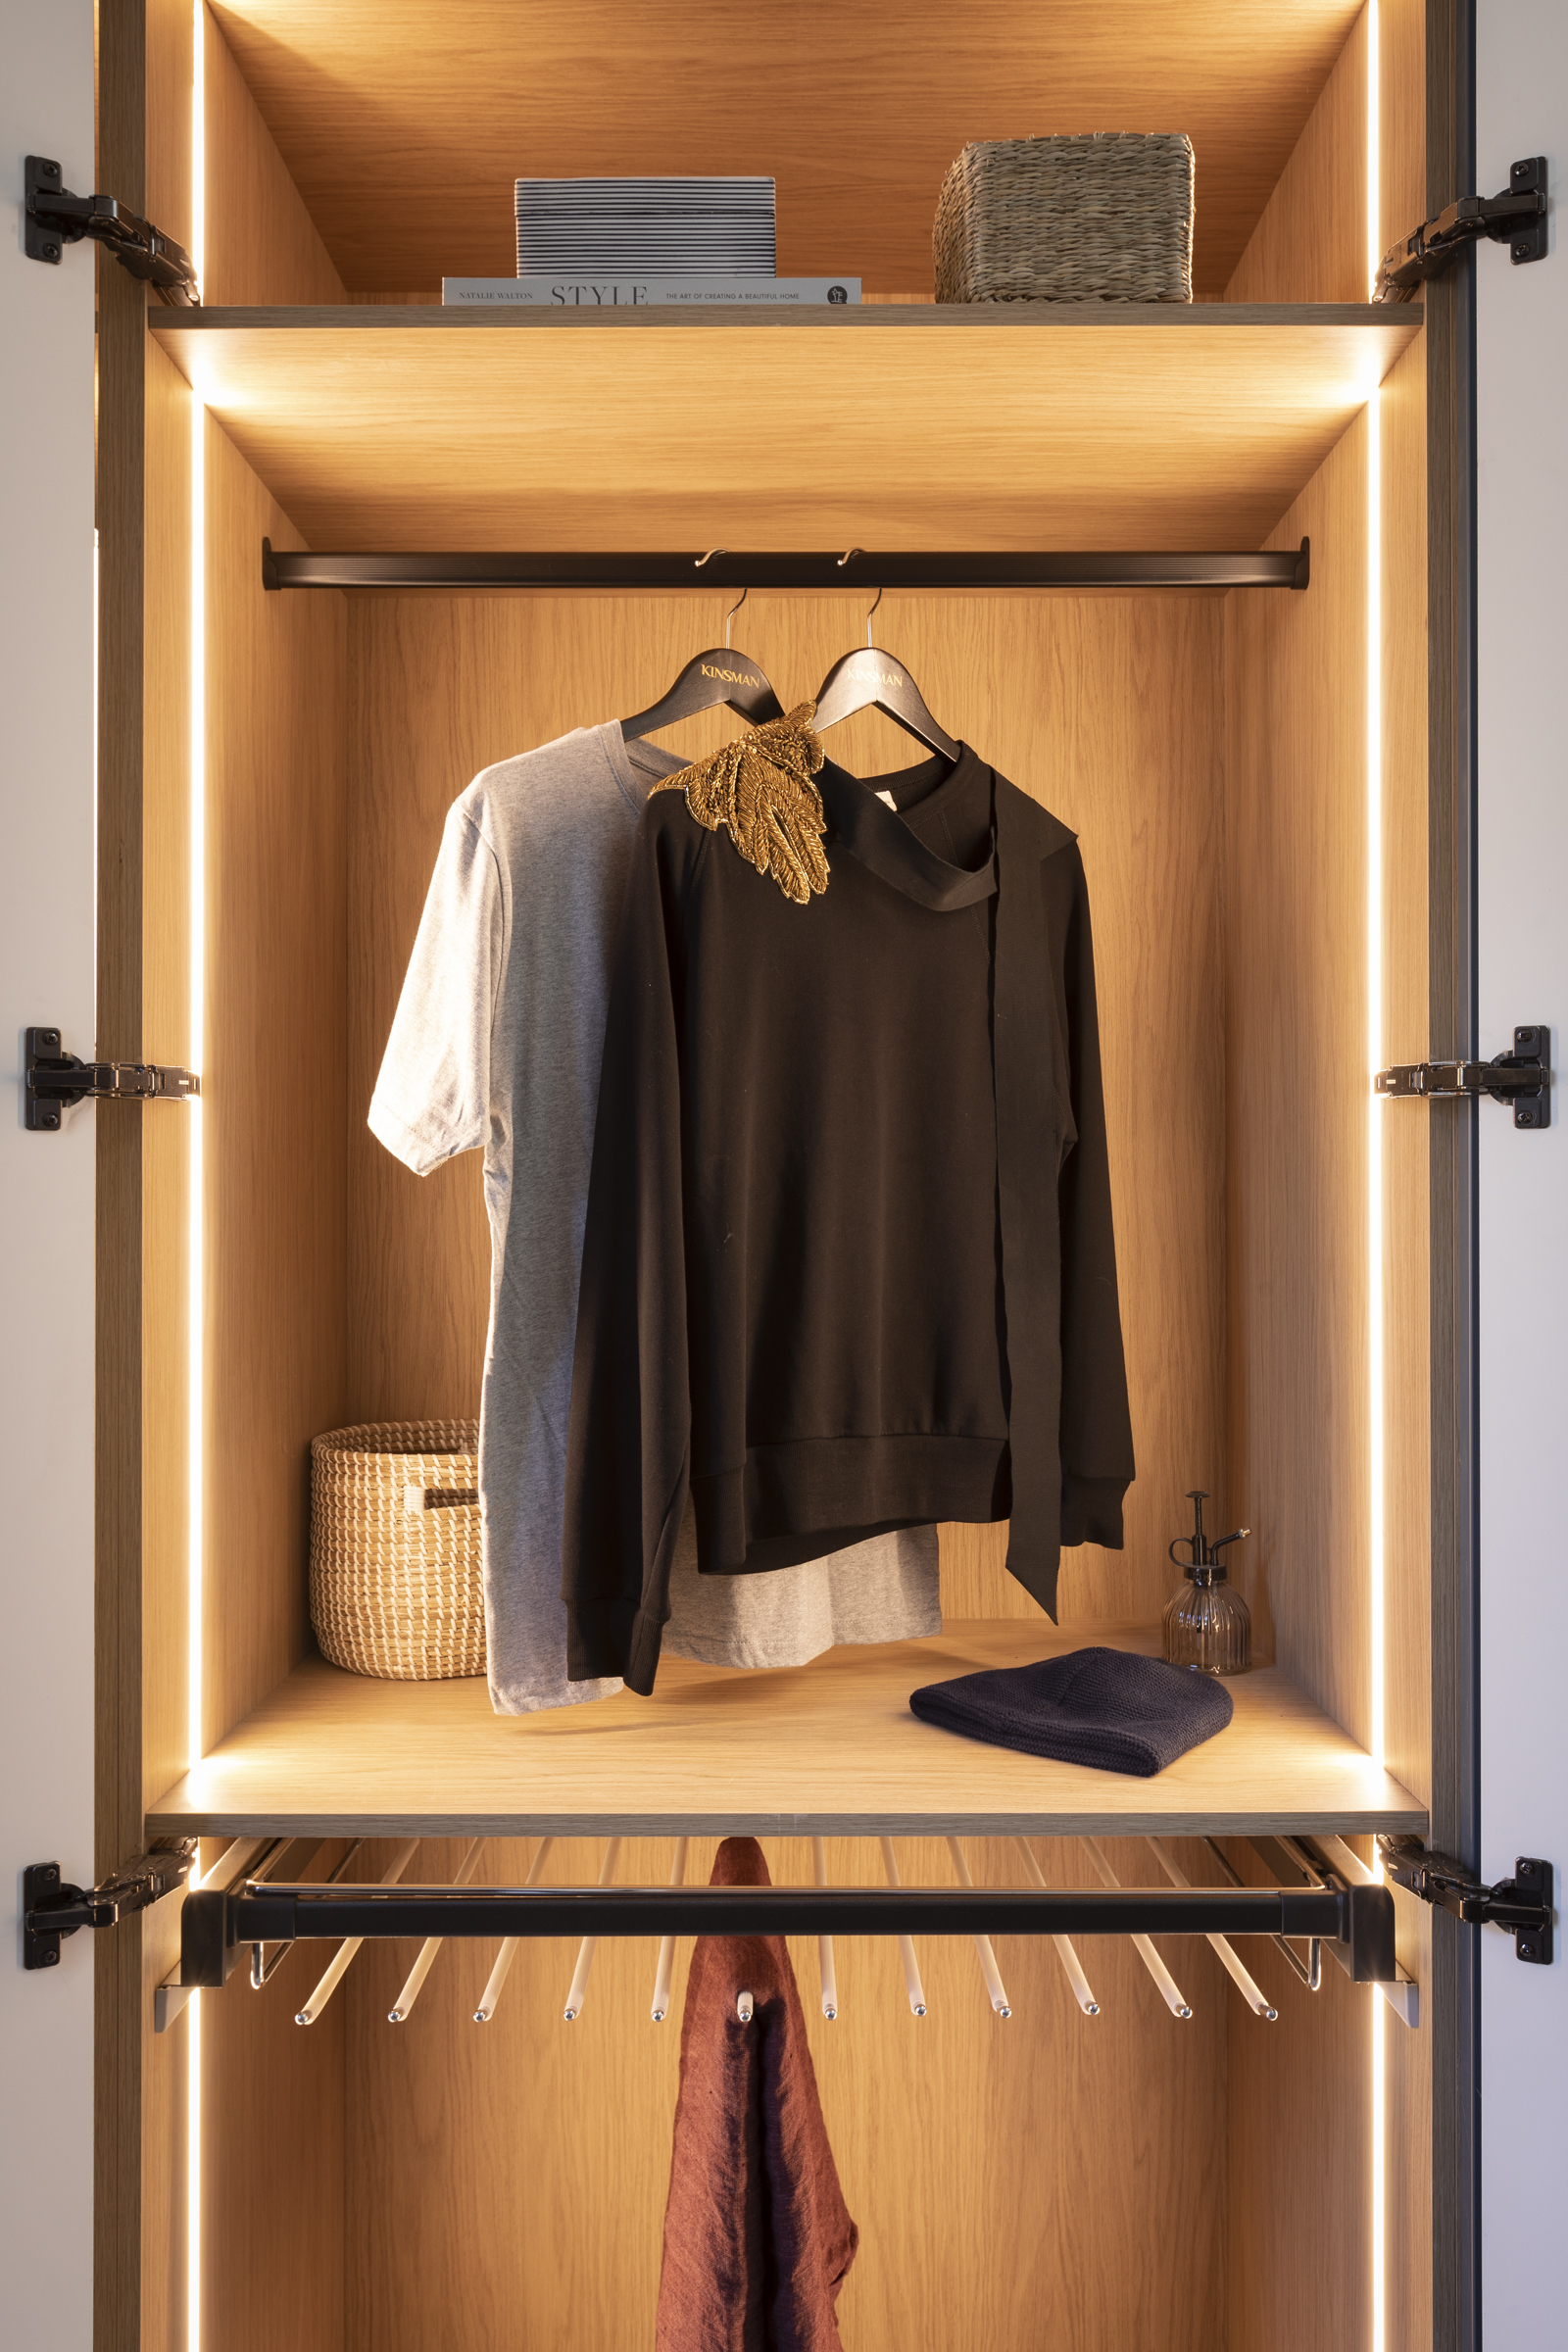 Pants Rack: Pull Out Pants Rack from Modular Closets